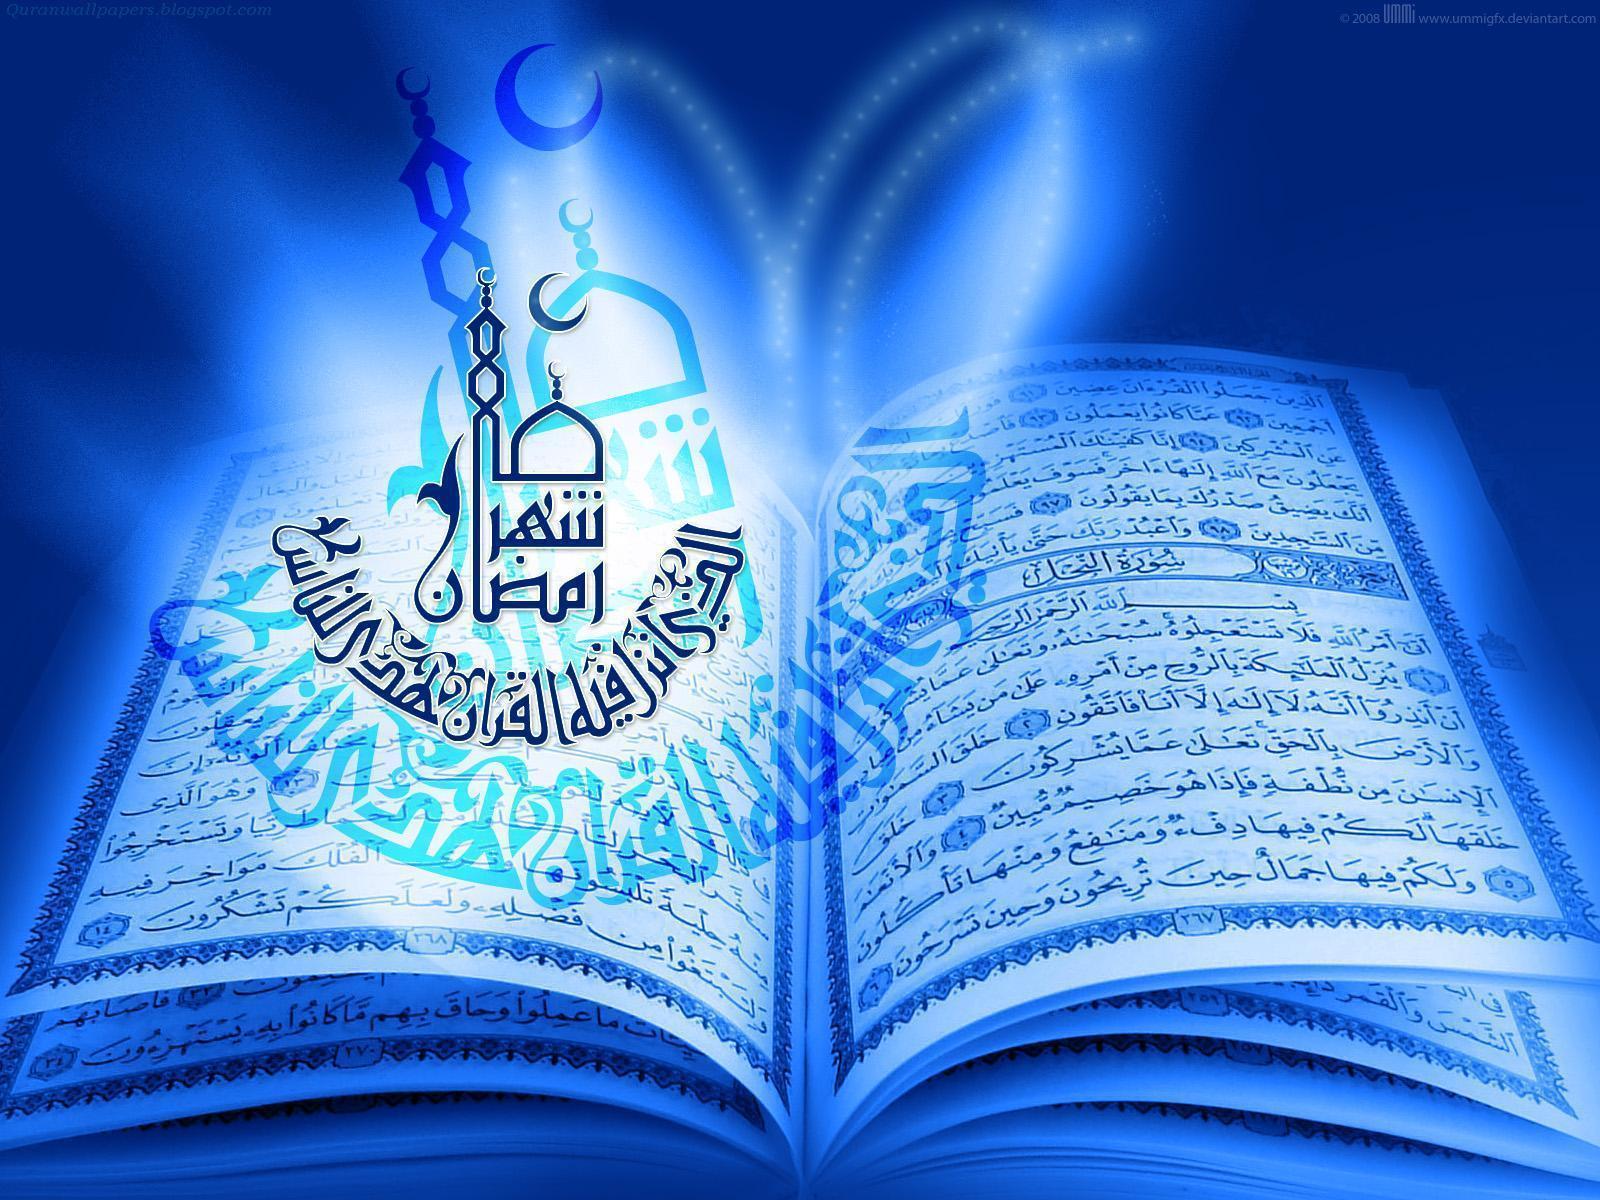 Quran Picture. Free Software. Free IDM Forever